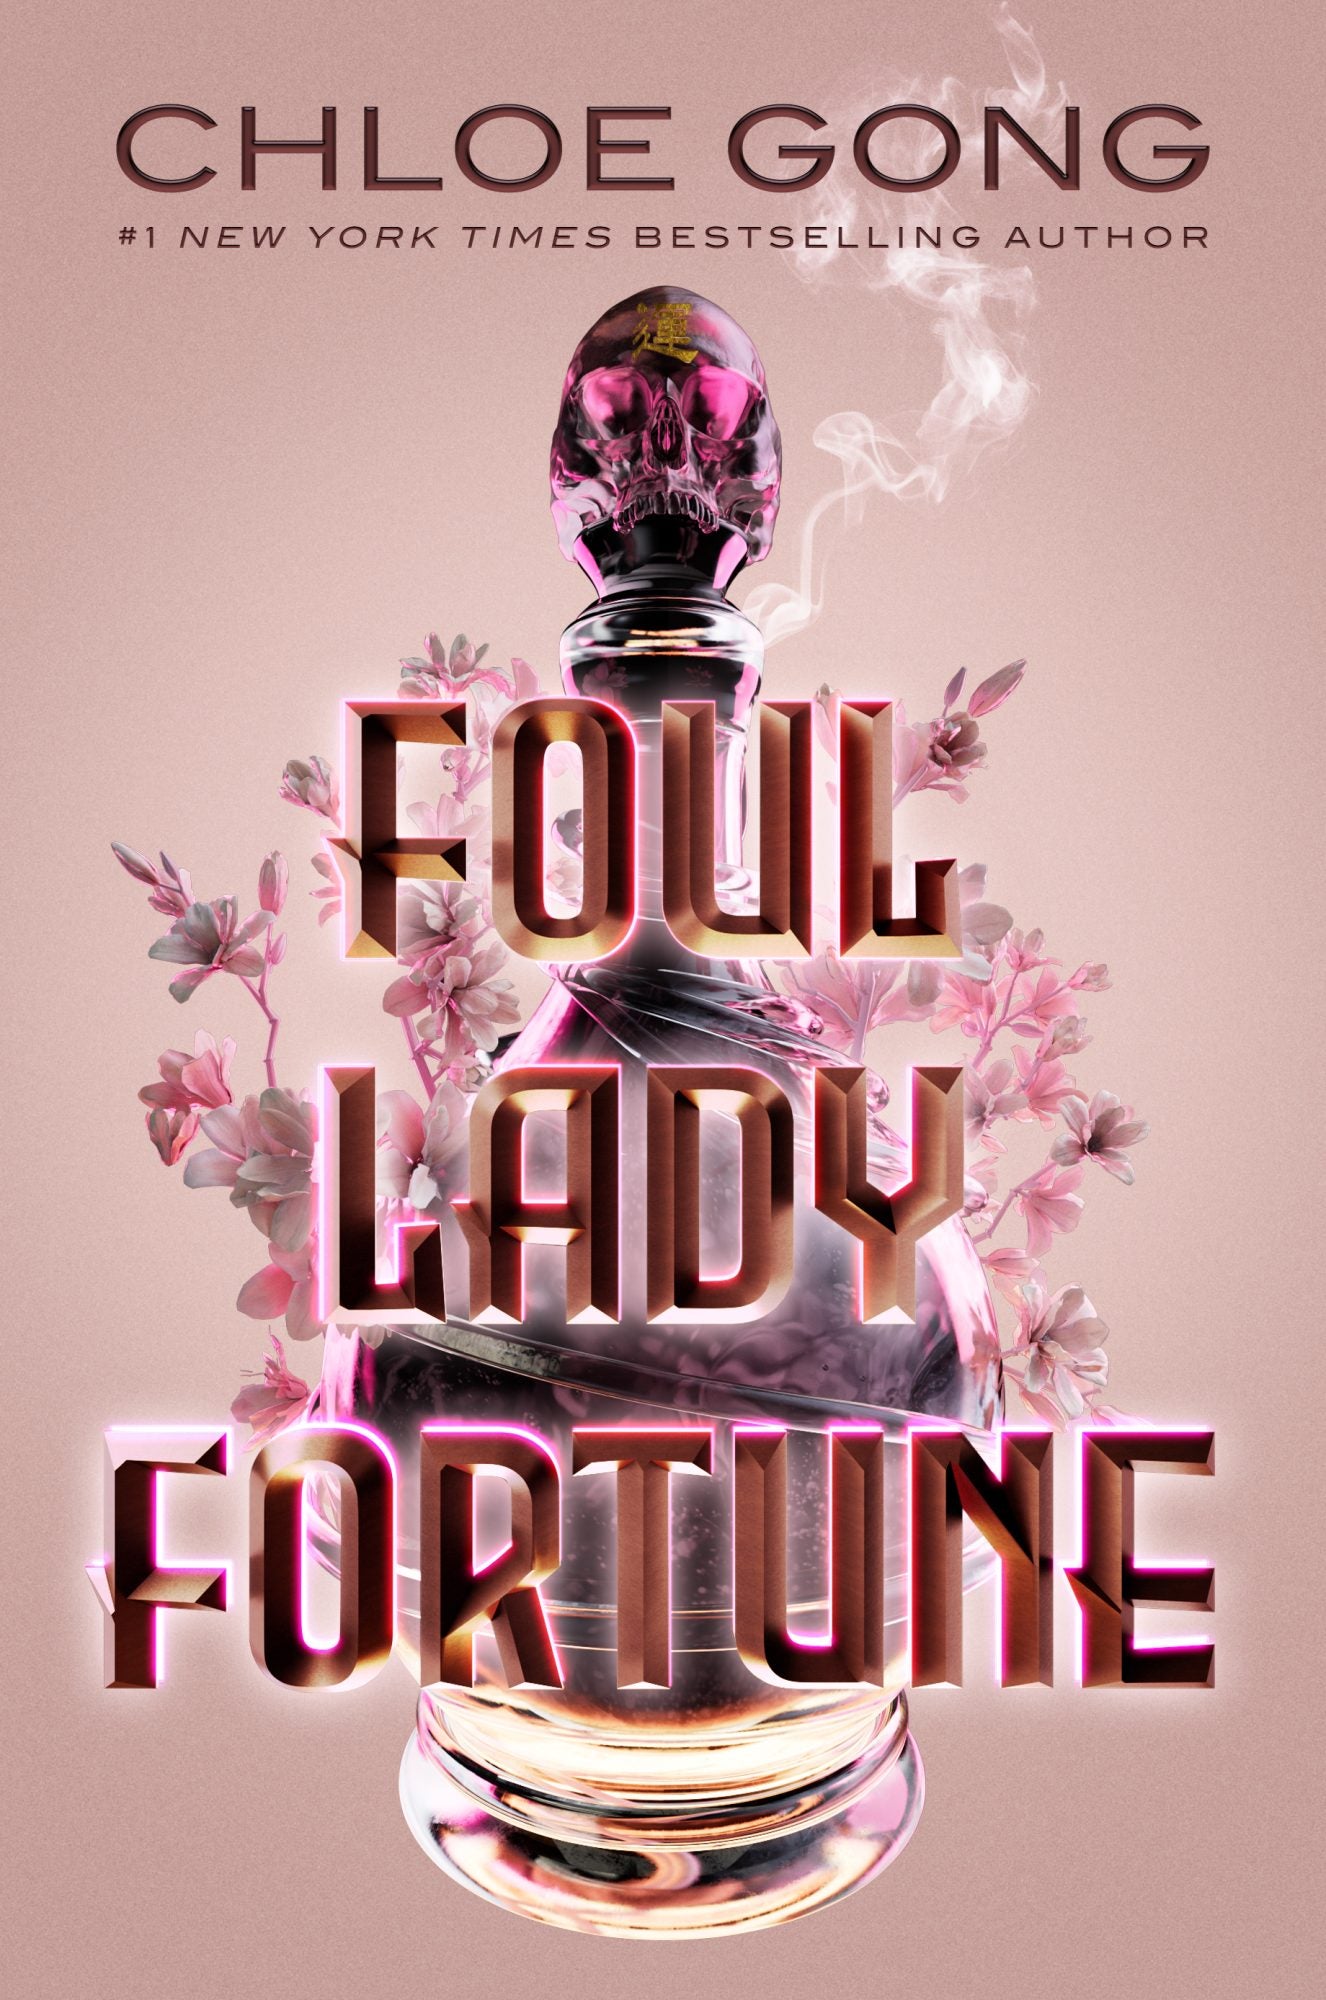 Foul Lady Fortune #1: Foul Lady Fortune -Hardcover